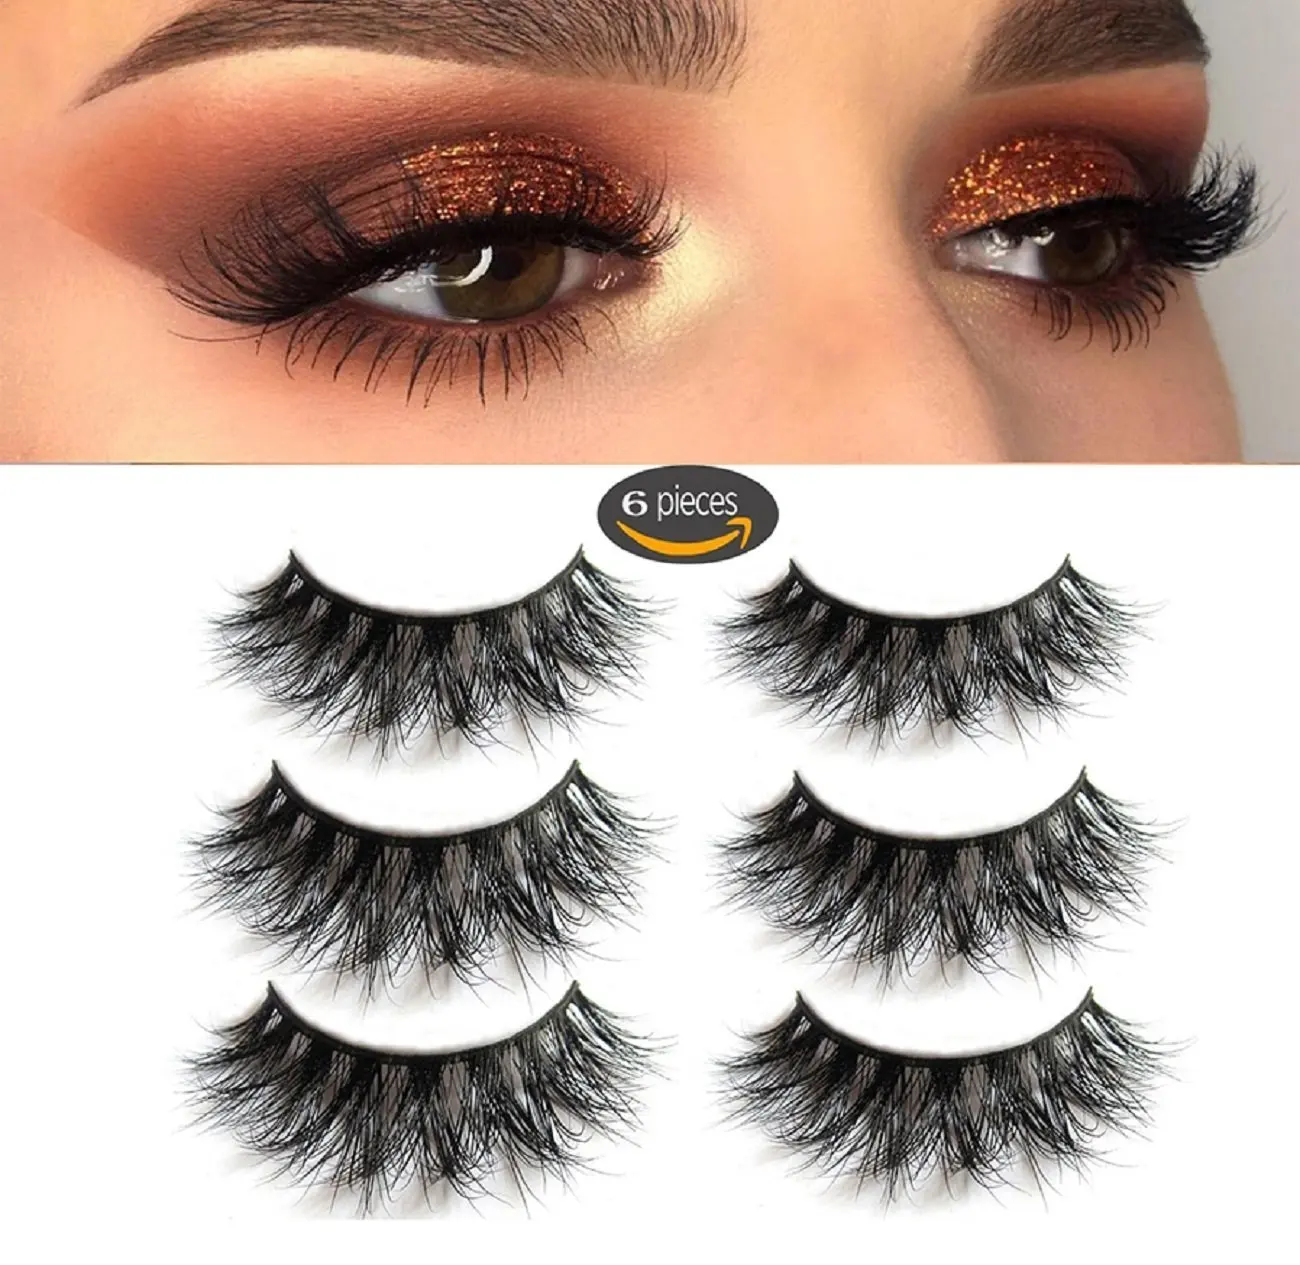 Cheap D Wispy Eyelashes, find D Wispy Eyelashes deals on line at